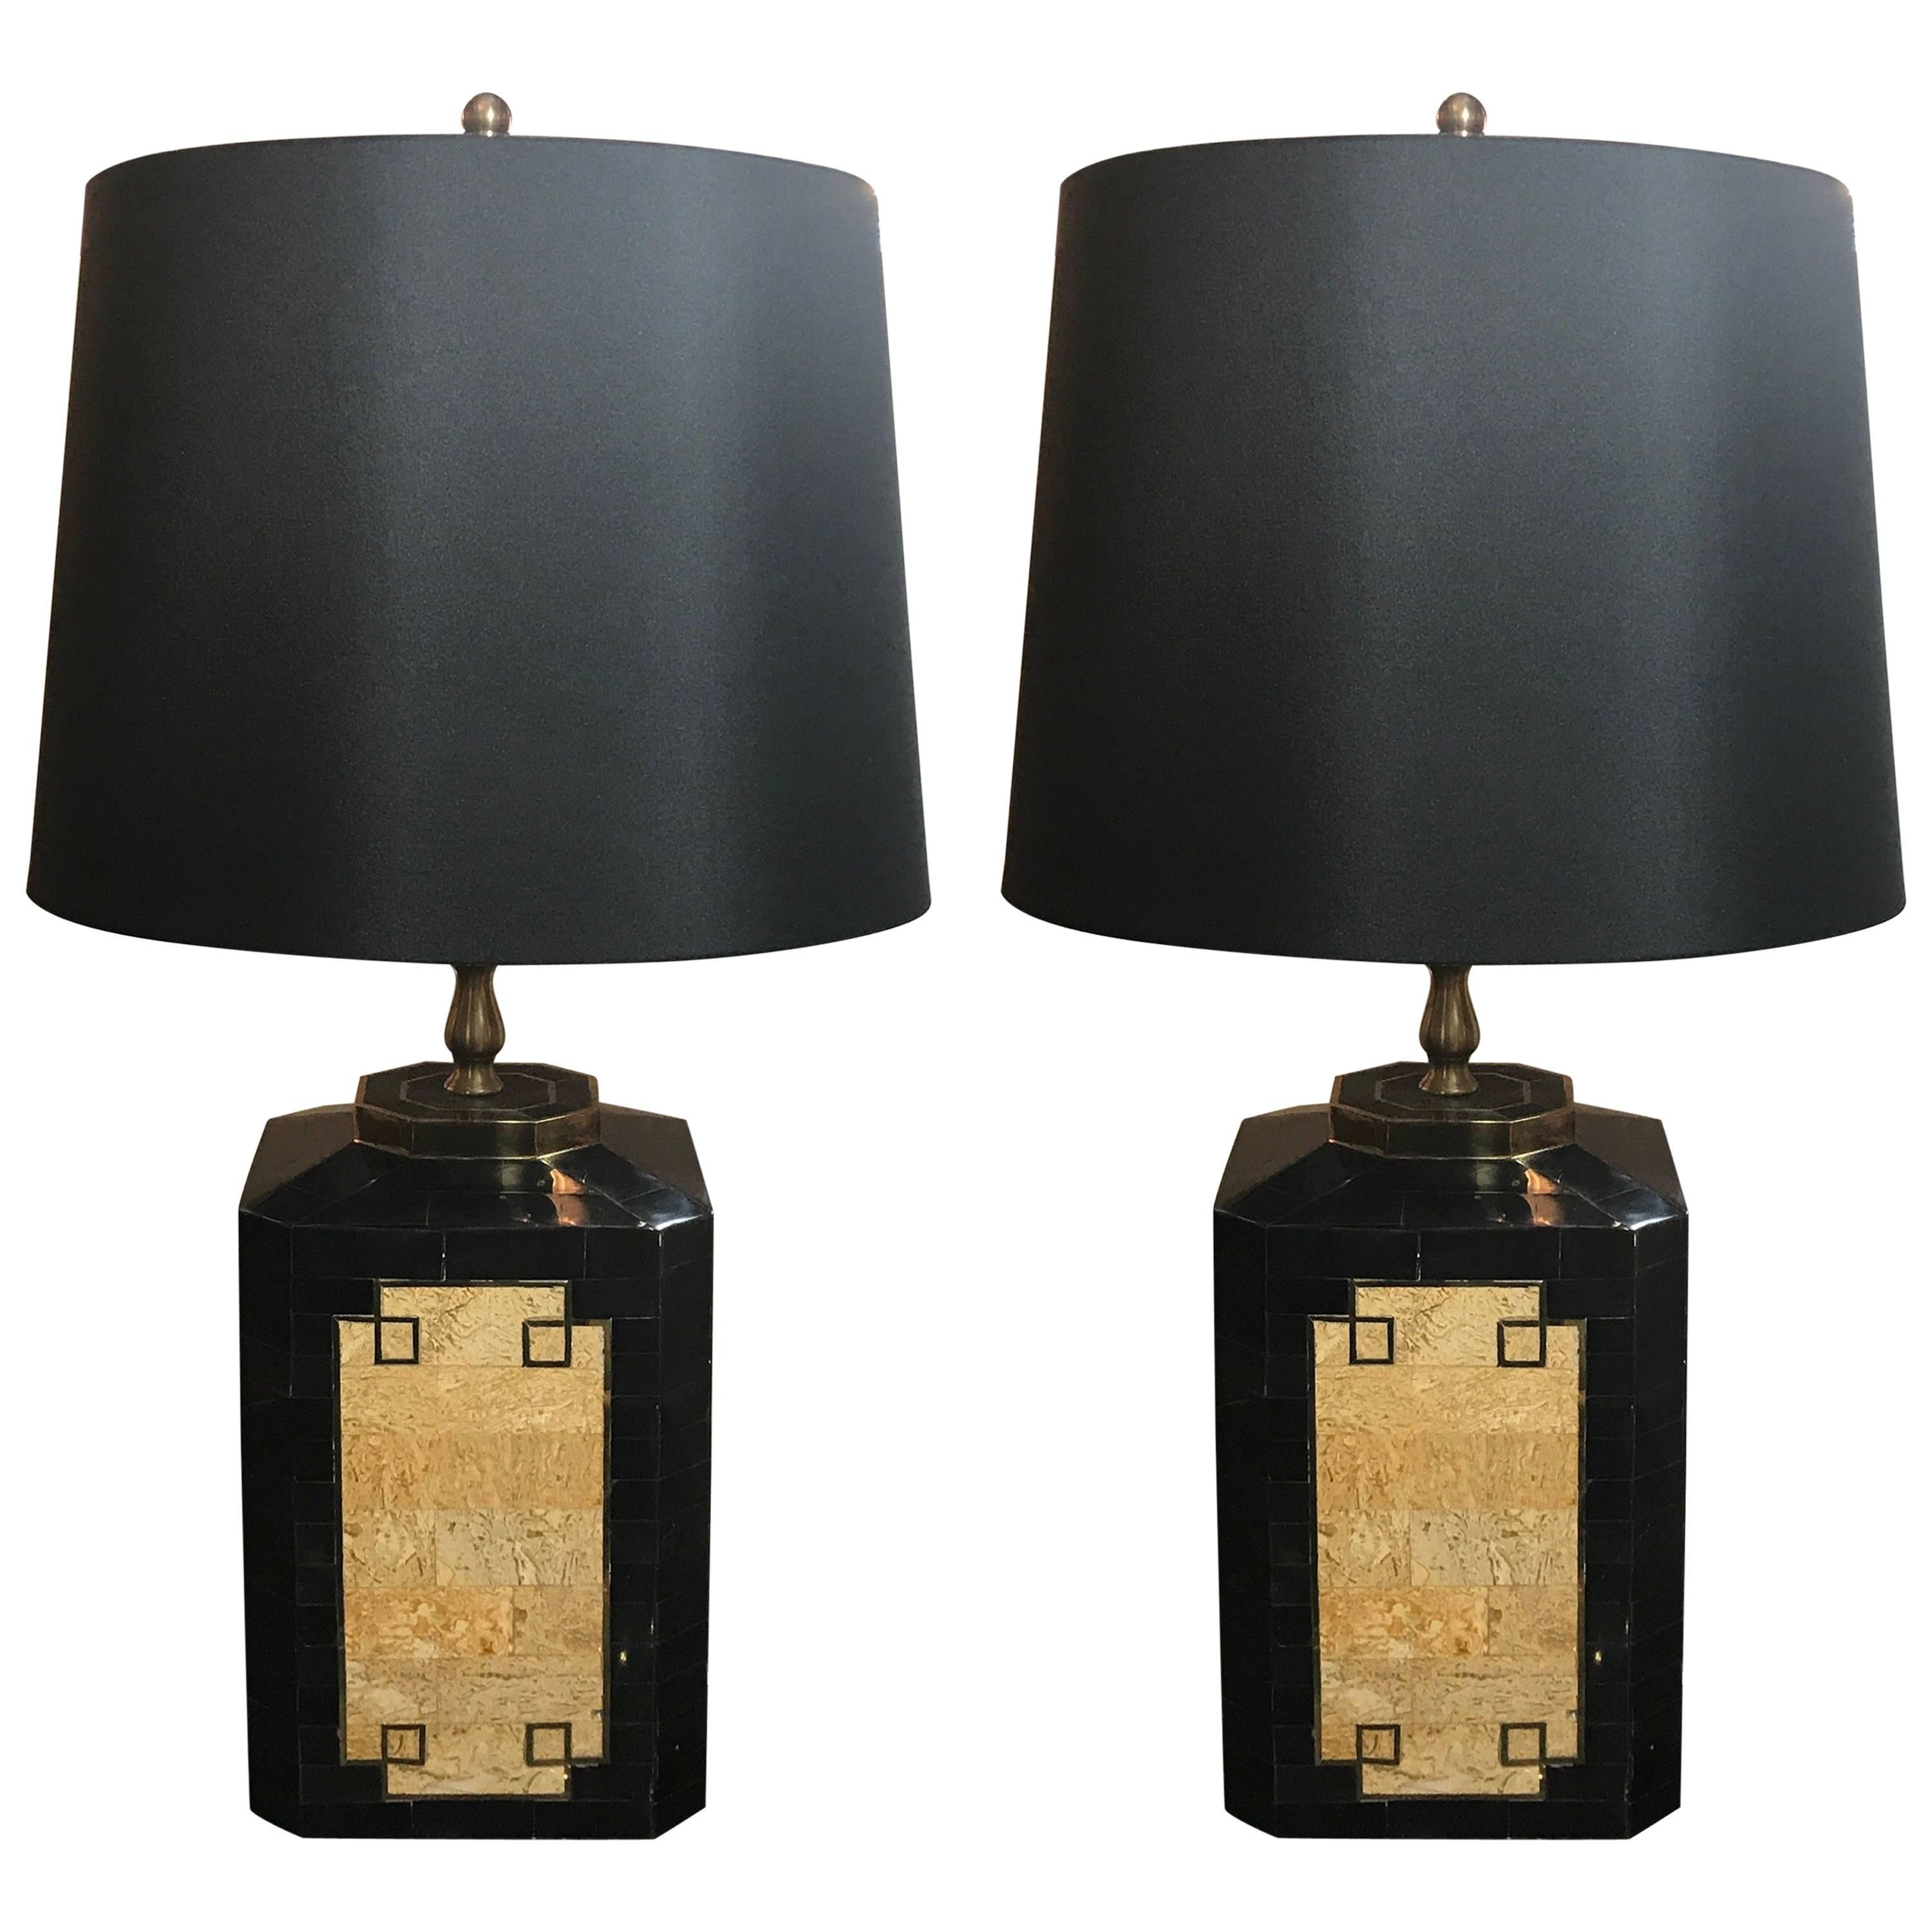 Pair or Tessellated Stone Inlaid Lamps